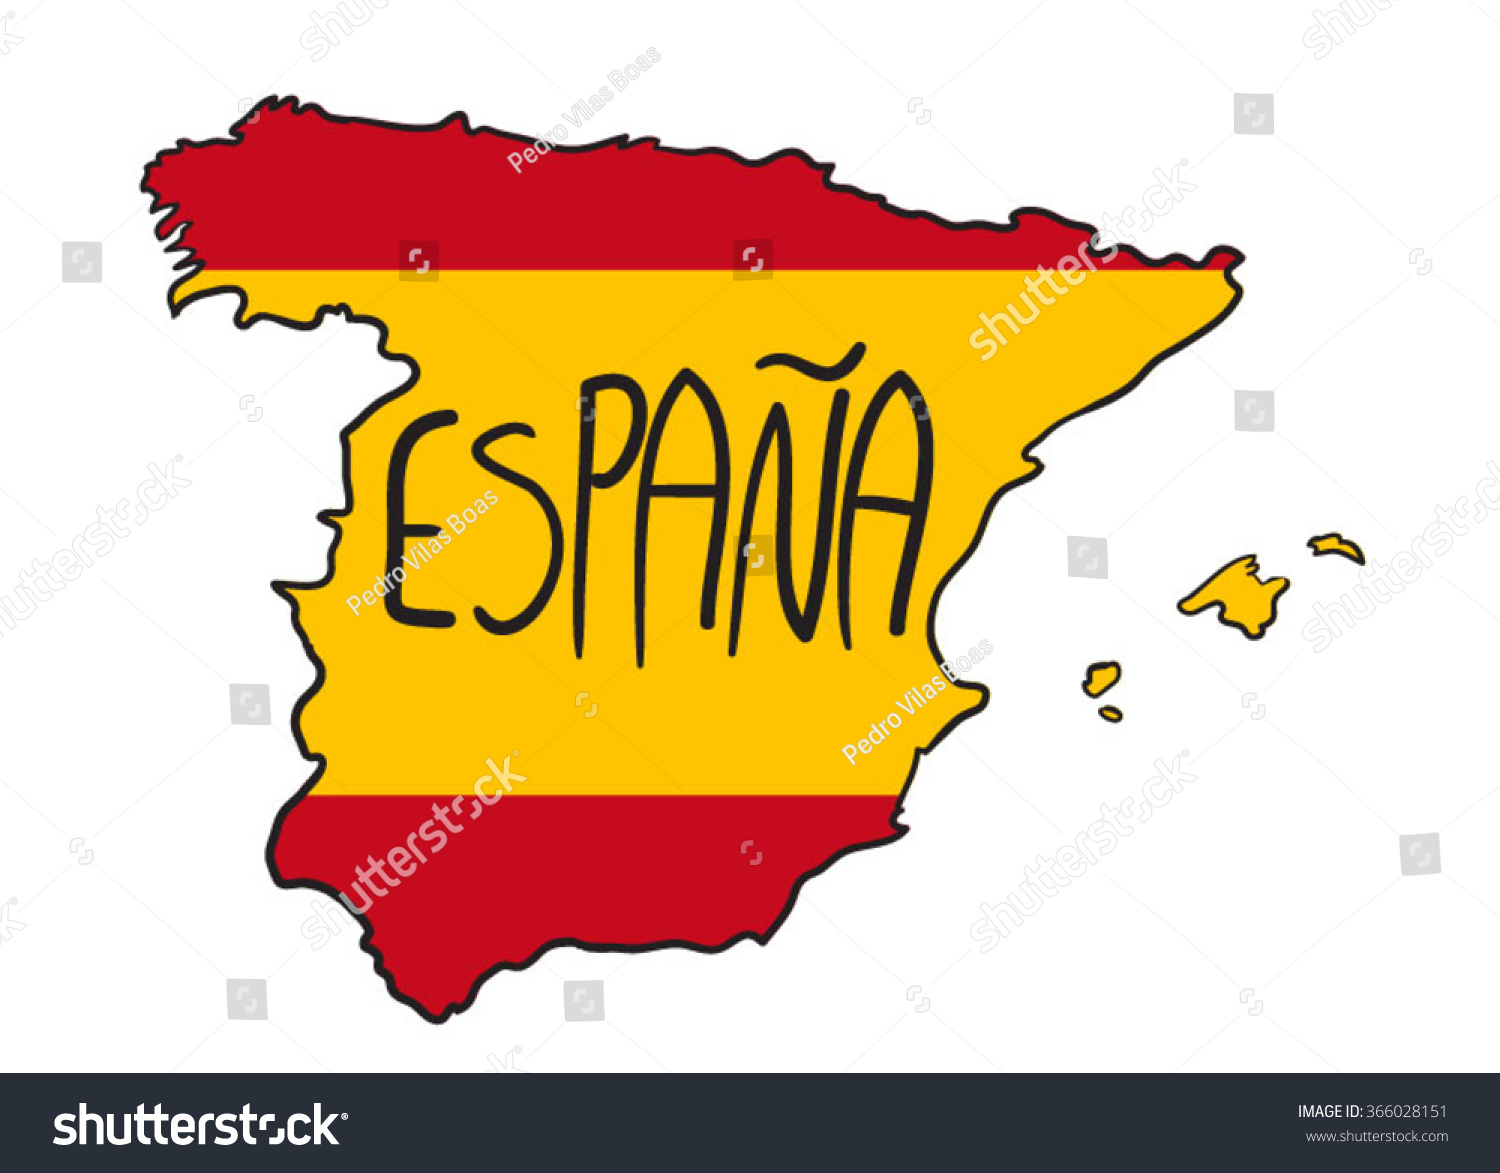 clipart map of spain - photo #31